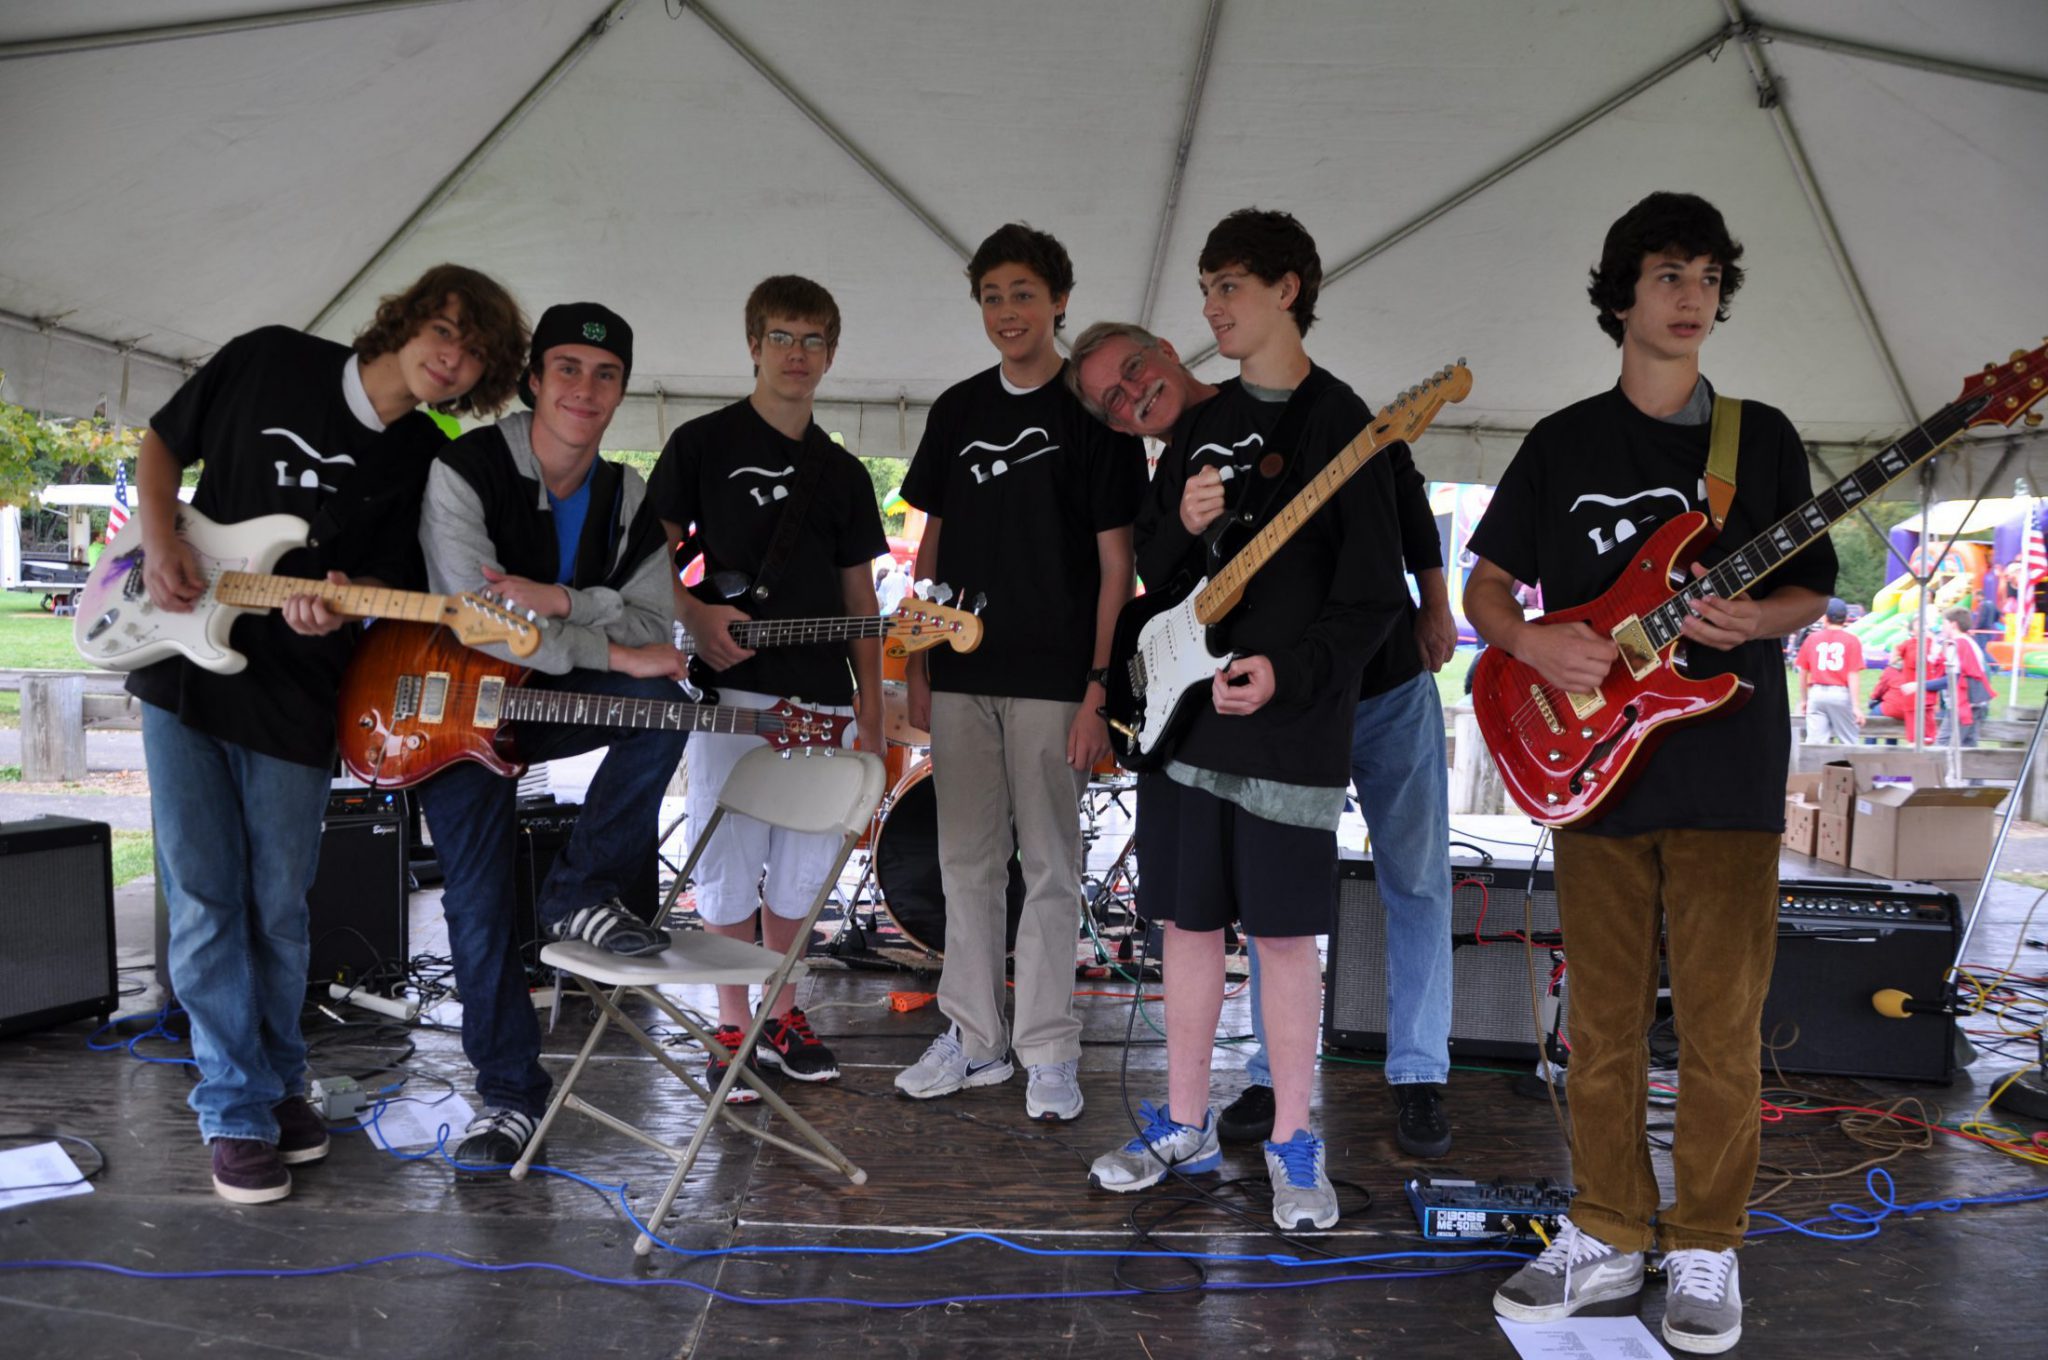 Avon Days Rock Band Class From Paul Howards Valley Music School